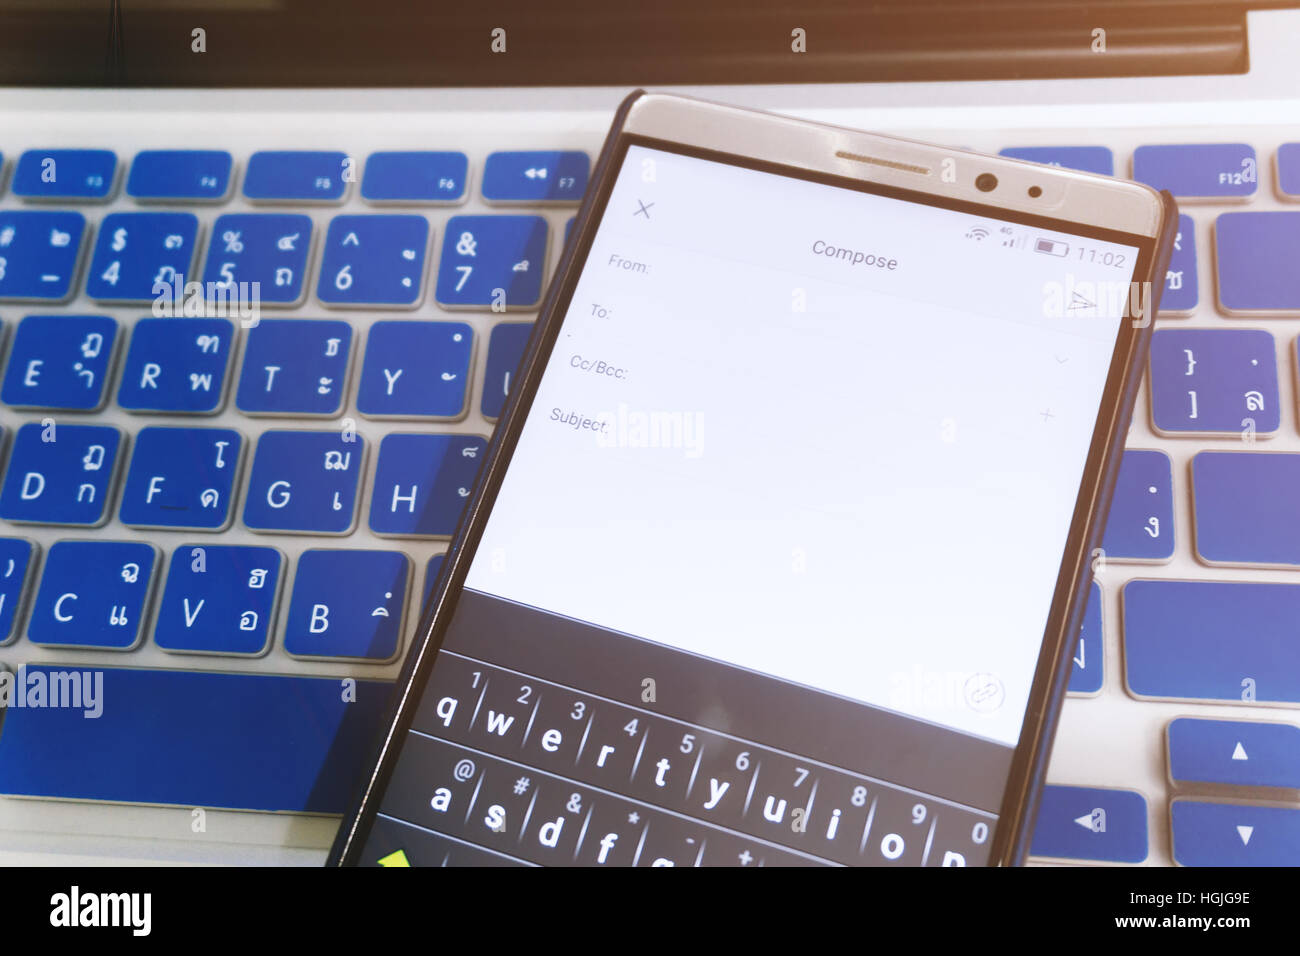 Close up Android device Showing Compose a new email application on the screen. Stock Photo